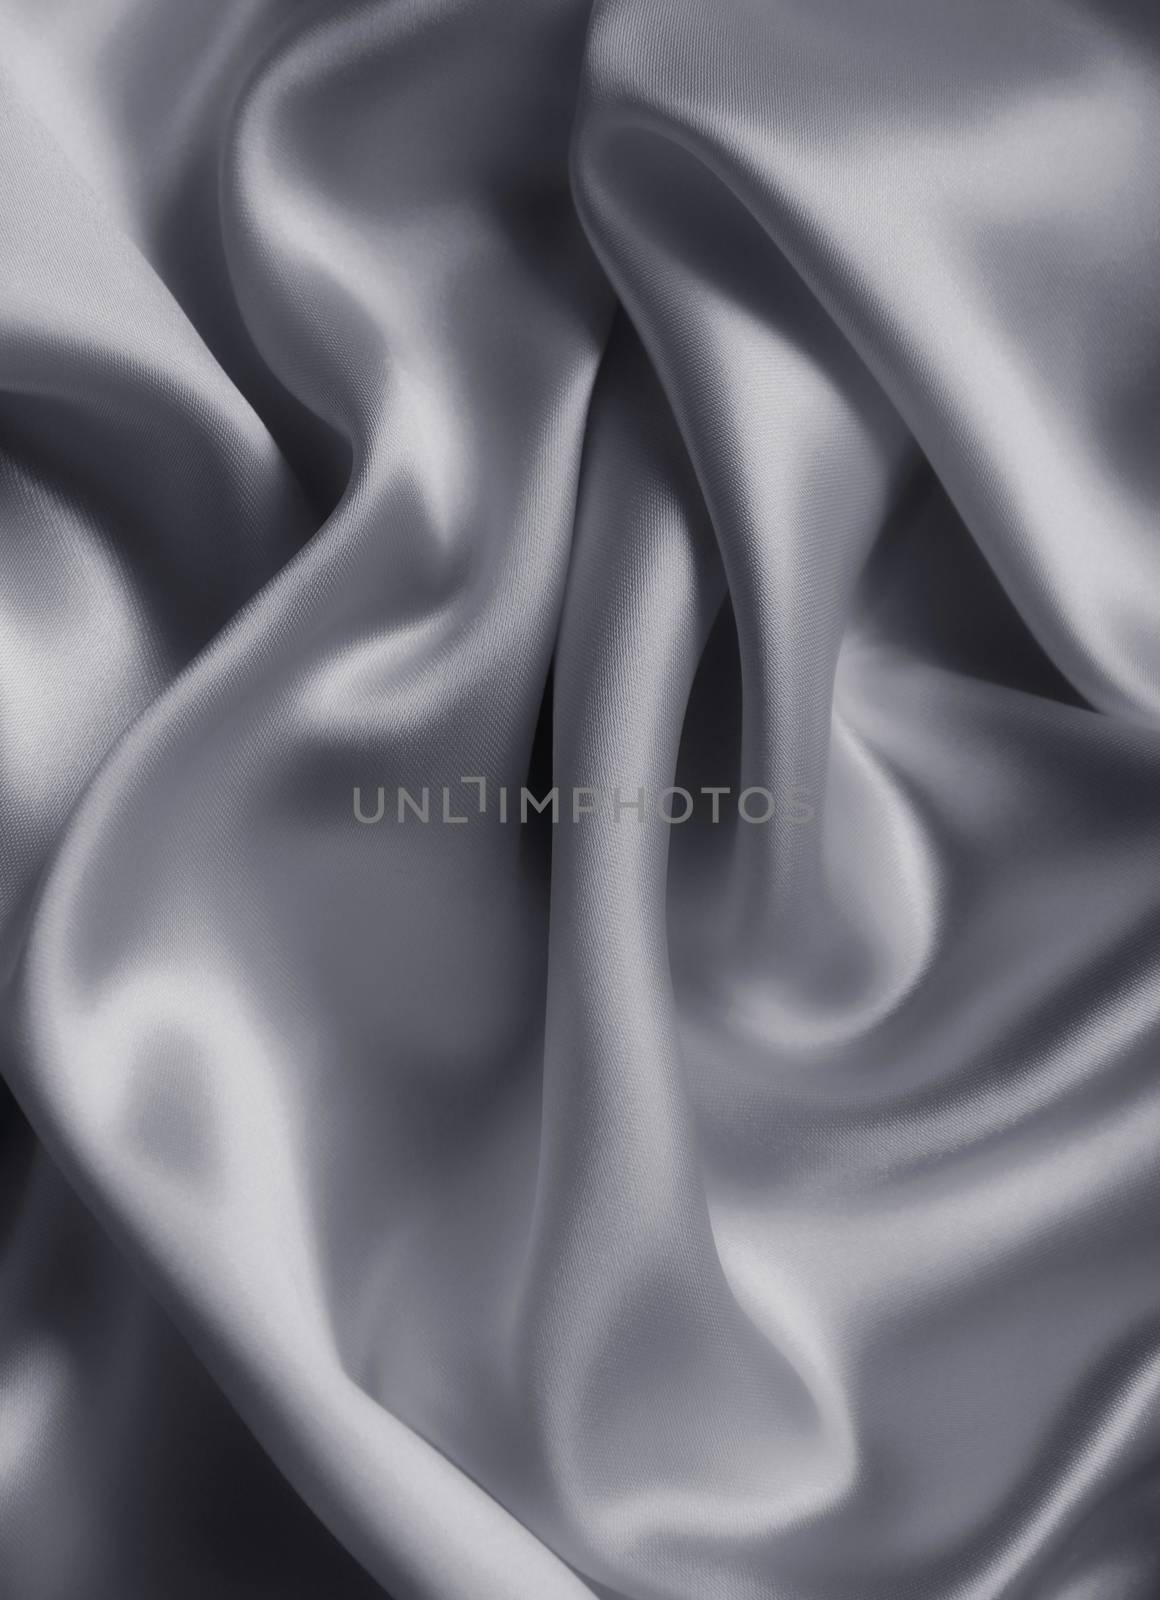 Smooth elegant grey silk or satin texture as background by oxanatravel